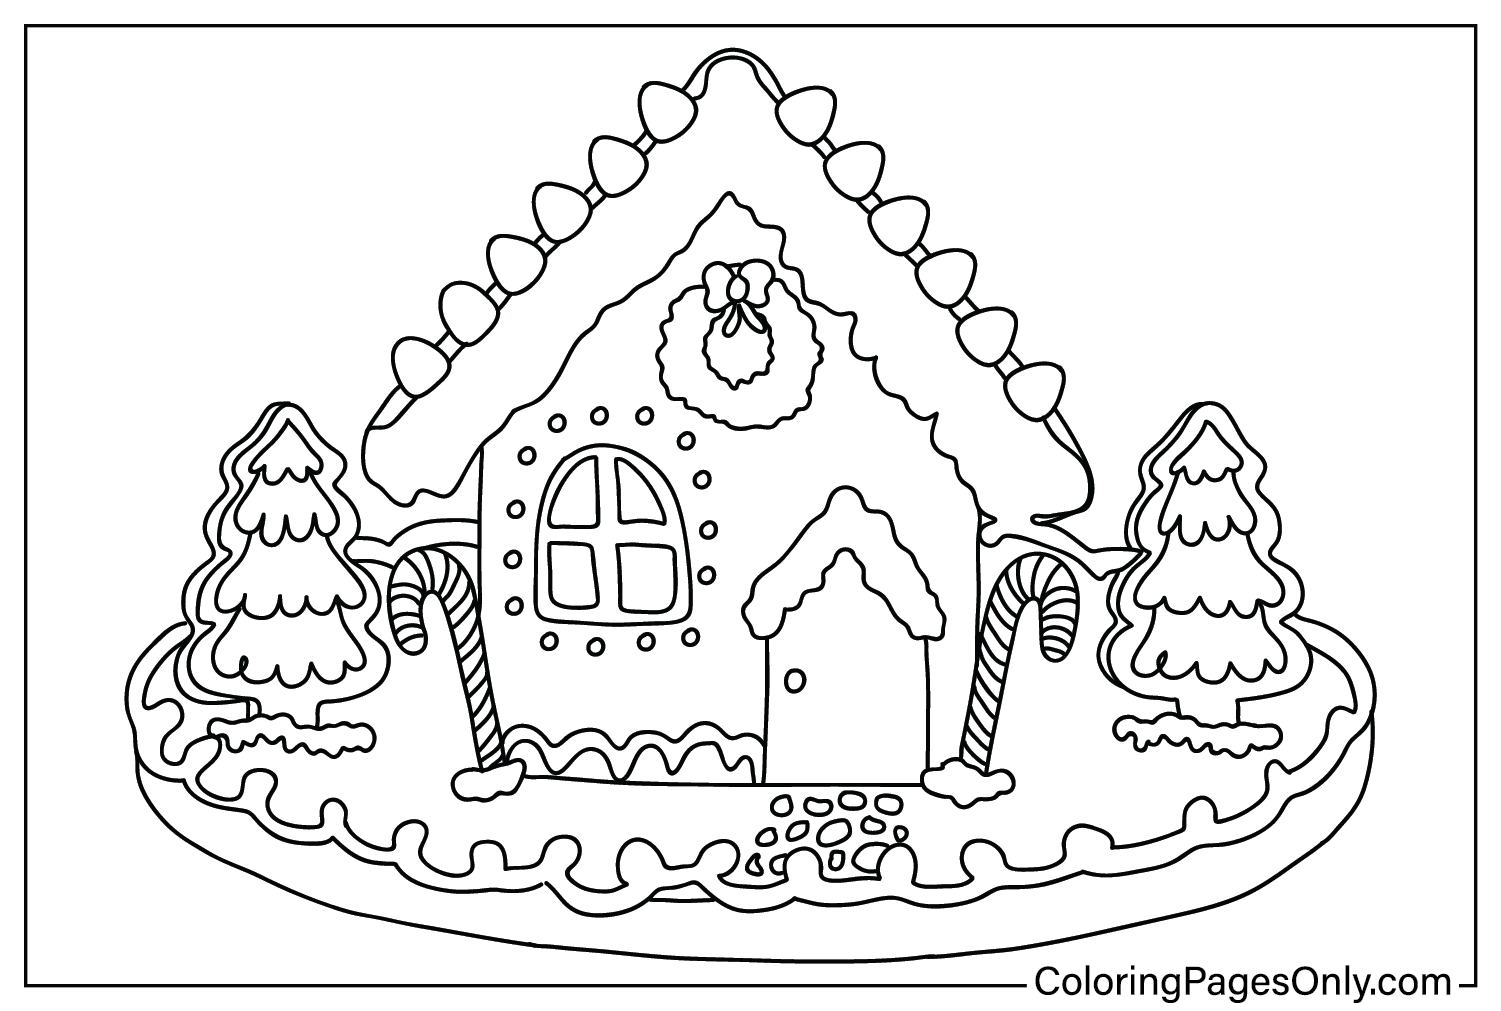 Free Printable Gingerbread House Coloring Page from Gingerbread House